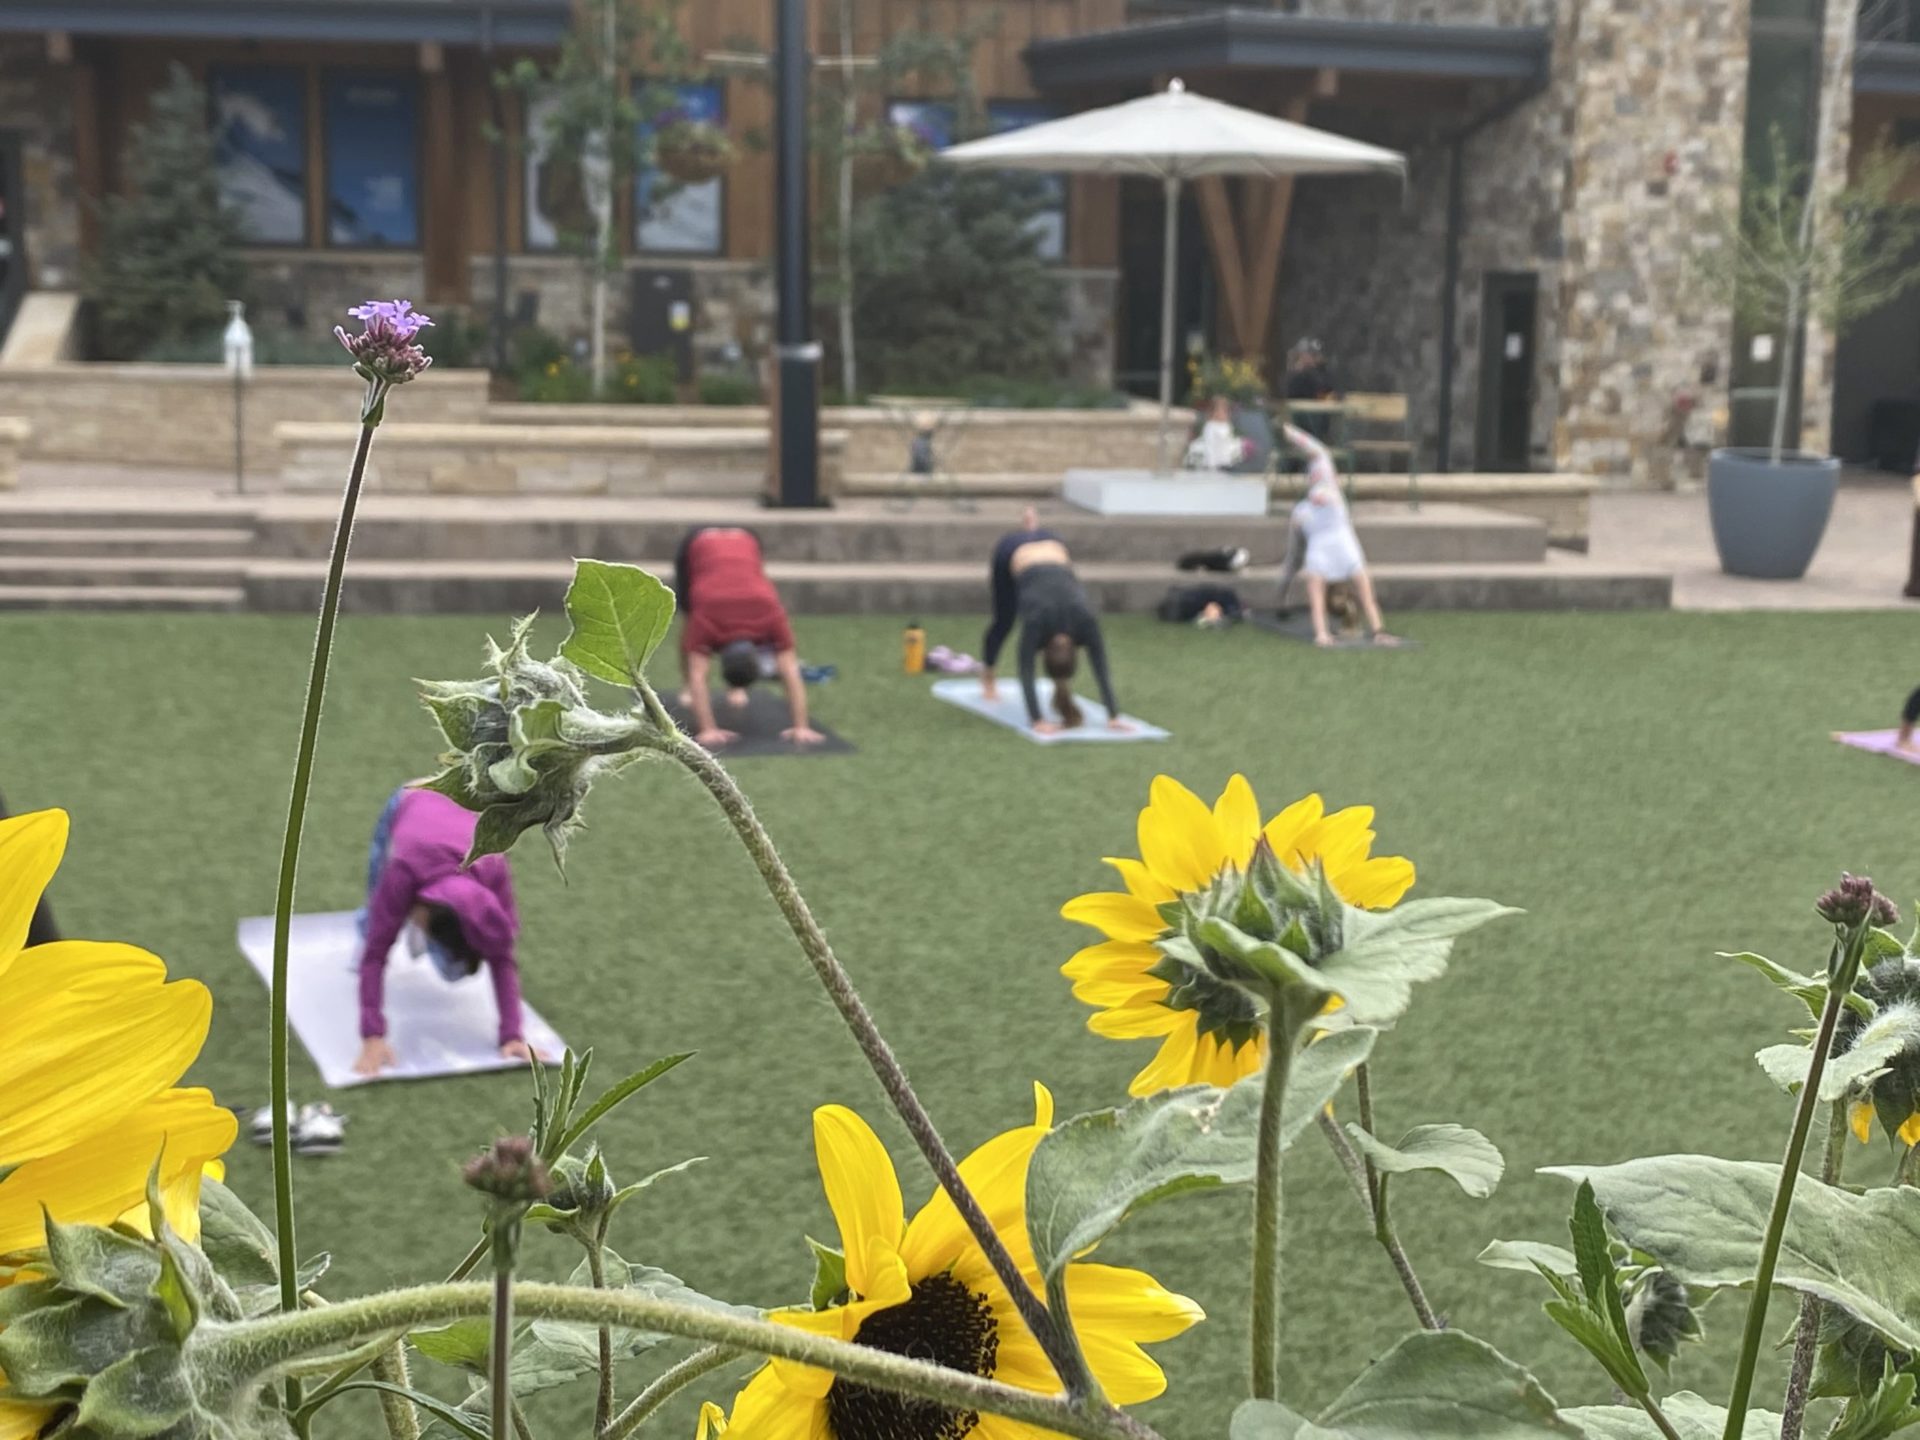 Flowers outside with people doing yoga behind